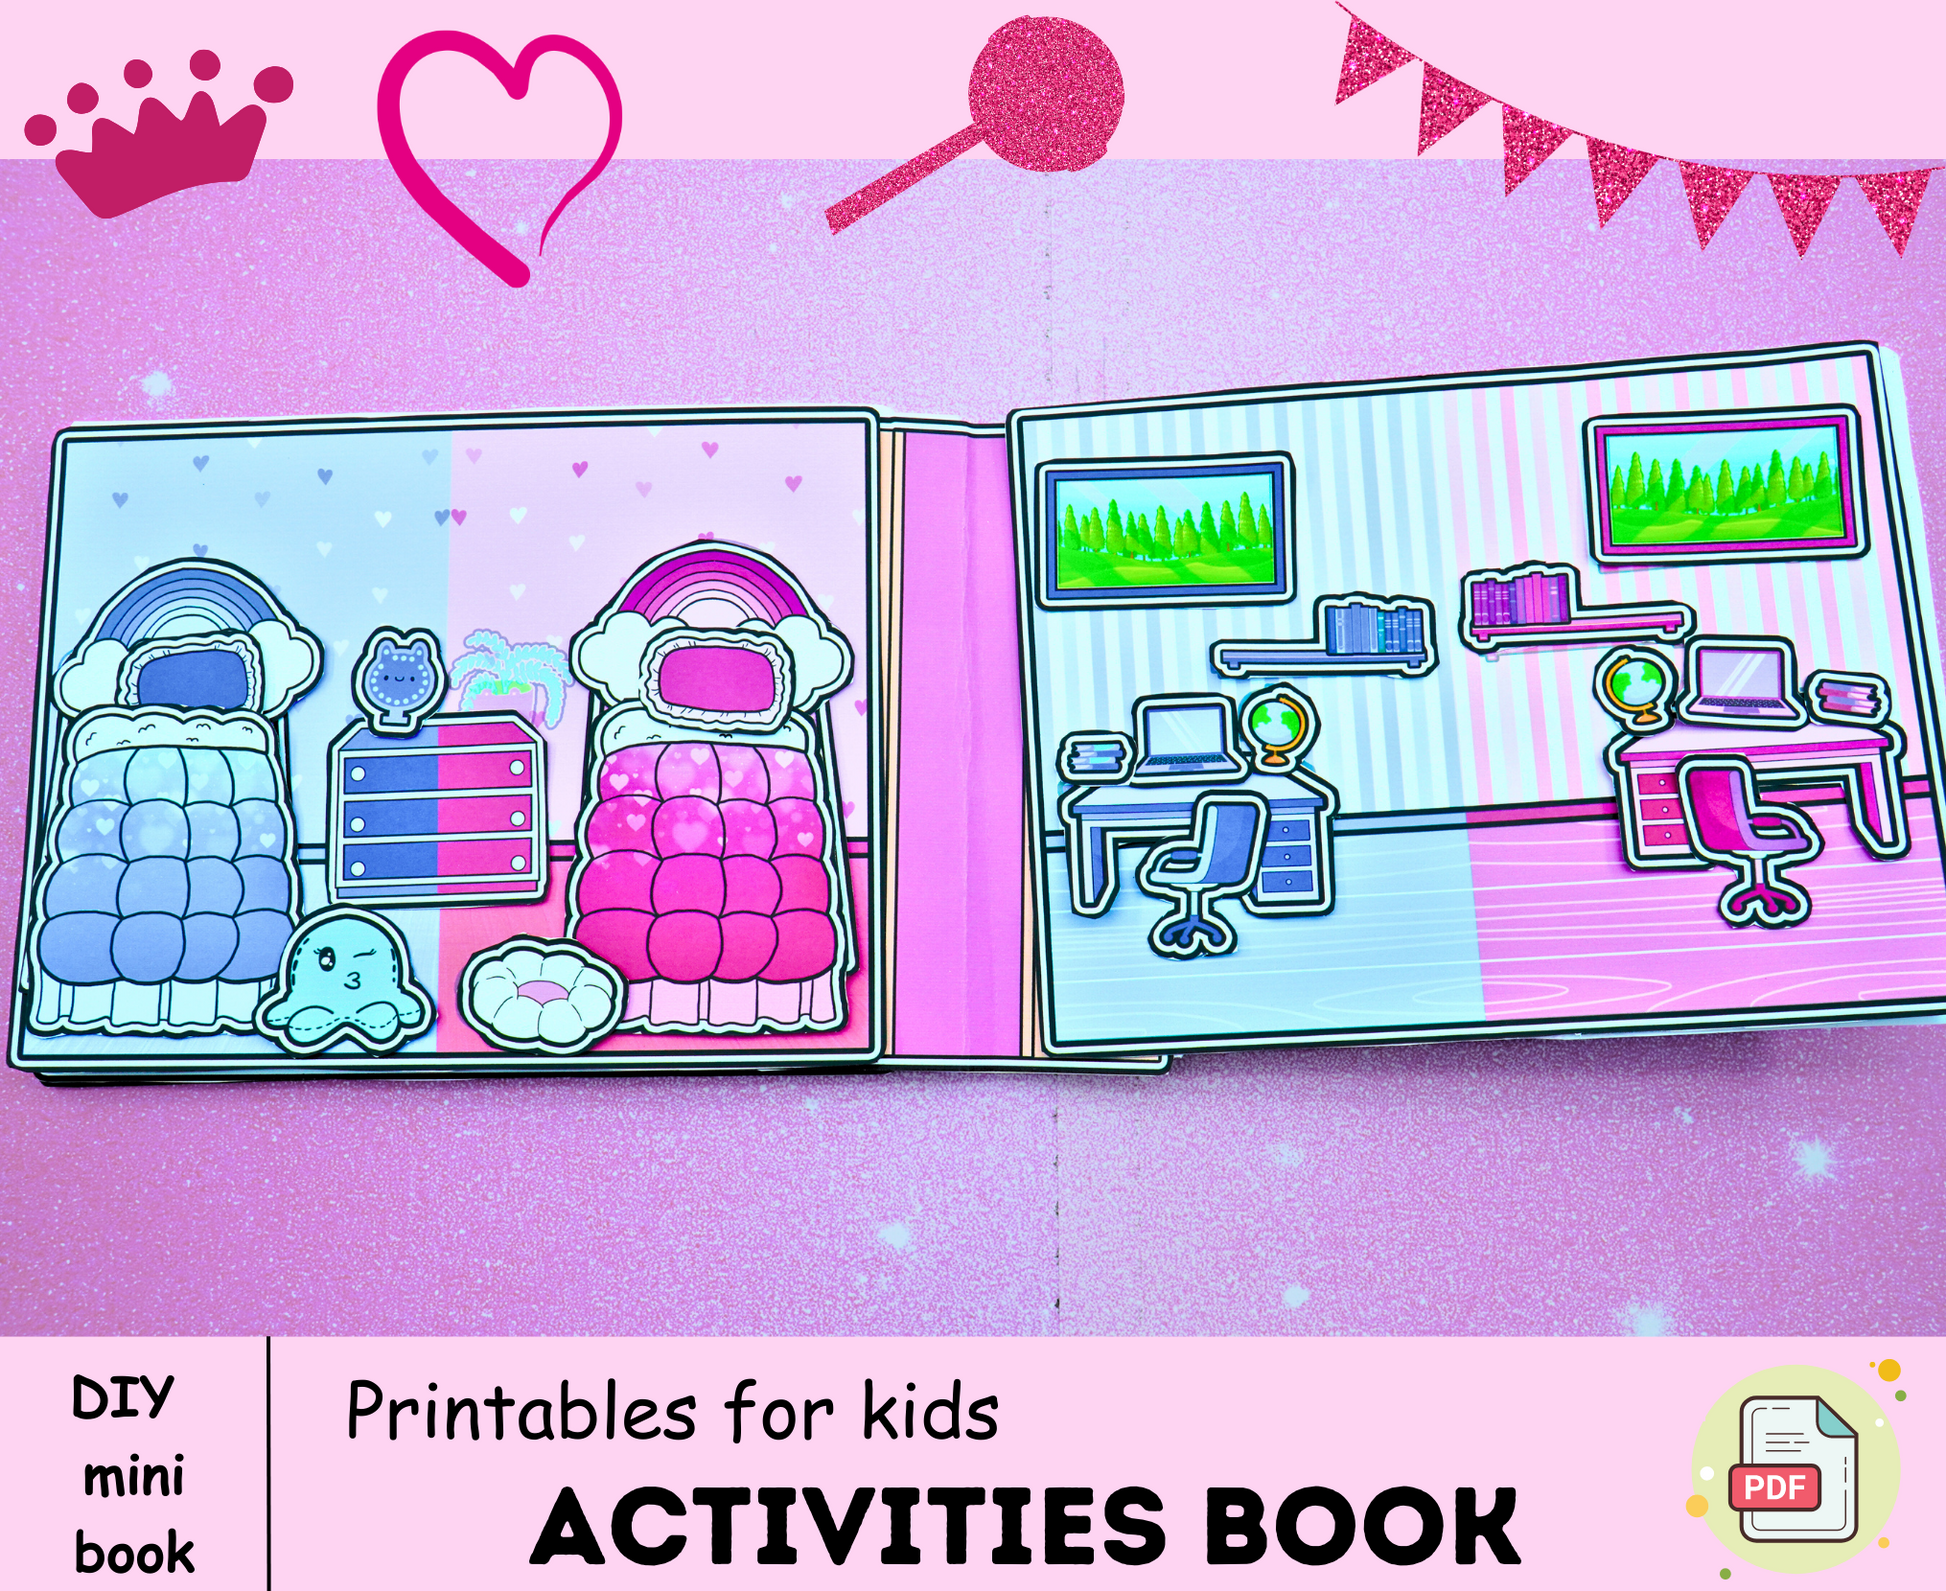 Printable Dollhouse Busy Book & Activities for Kids PDF -   Free  printable paper dolls, Paper doll printable templates, Paper doll house